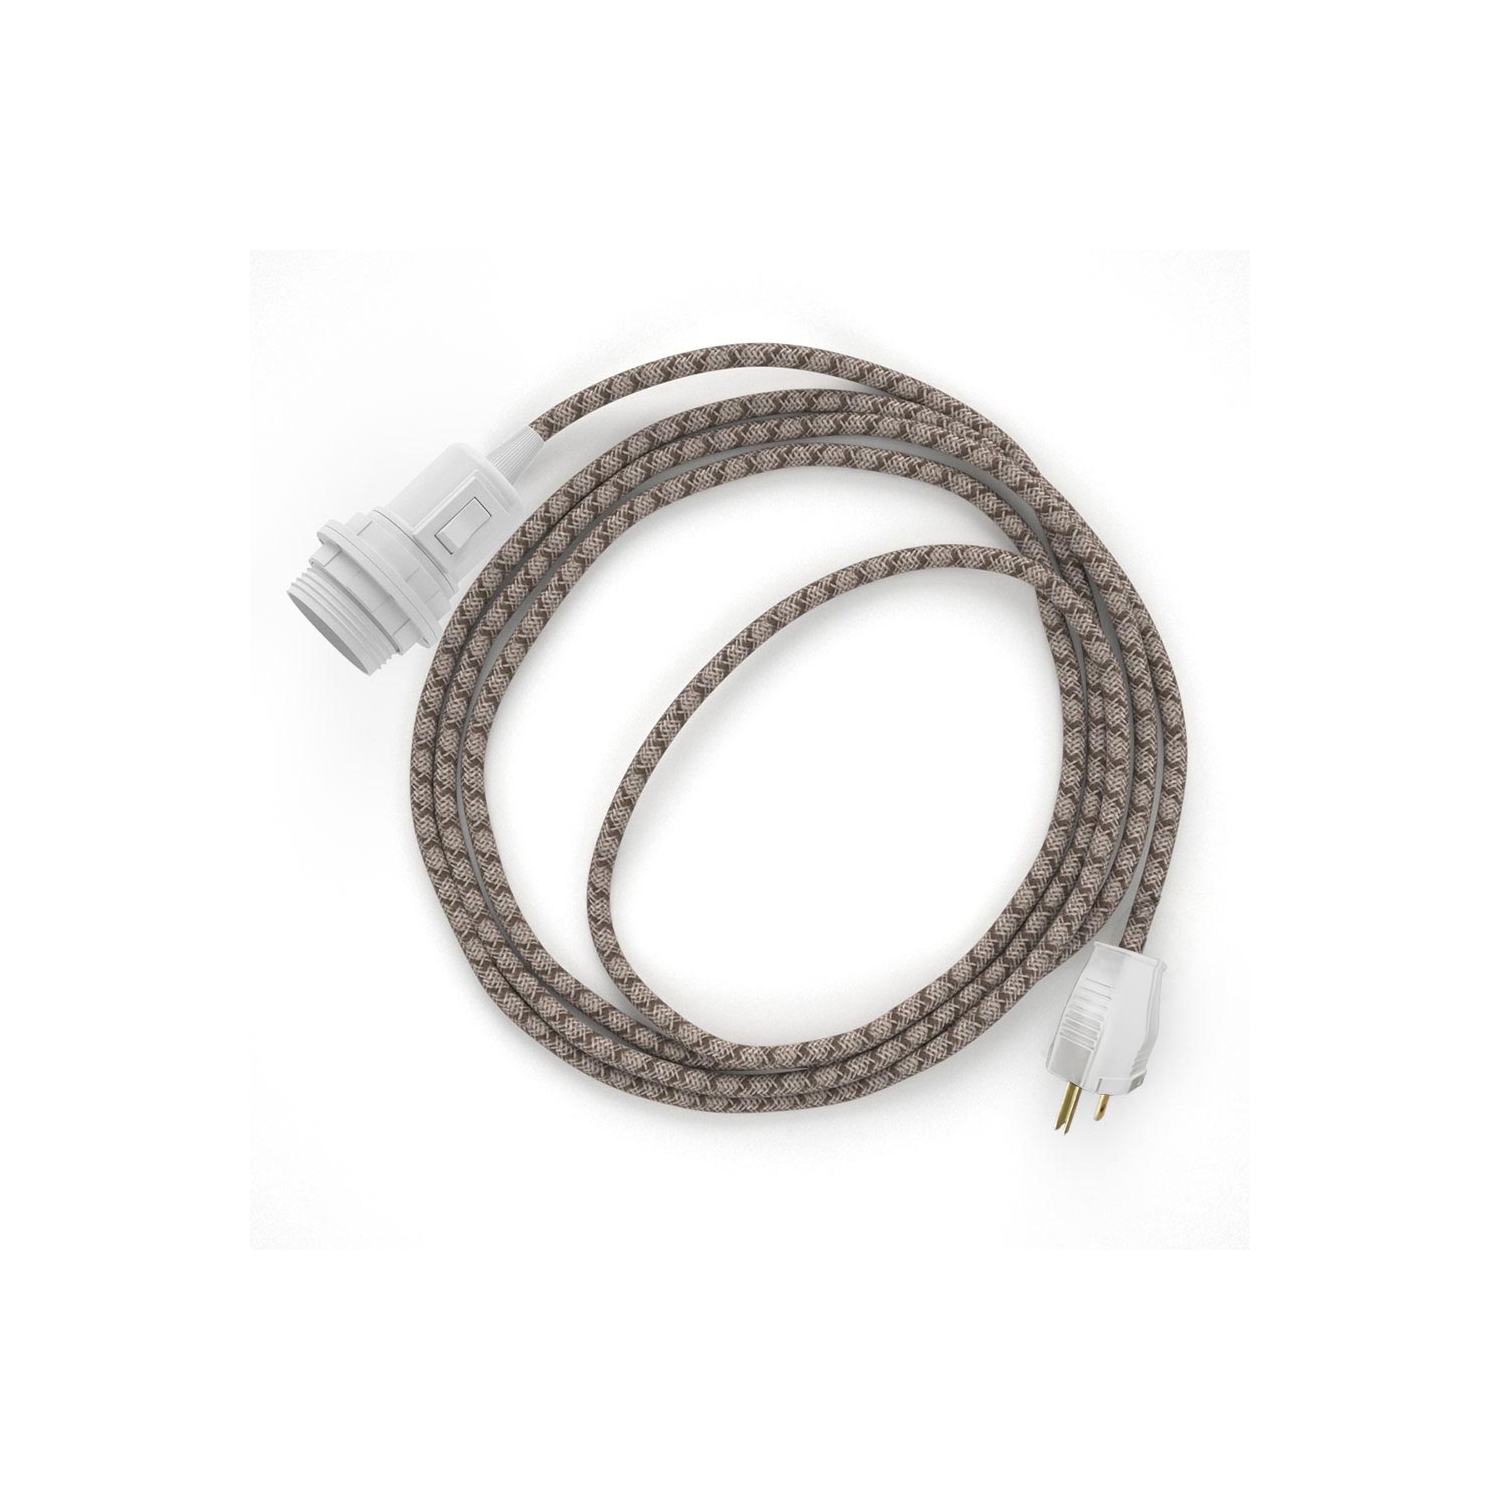 Plug-in Pendant for Lampshade with switch on socket | RD63 Natural & Brown Linen CrissCross